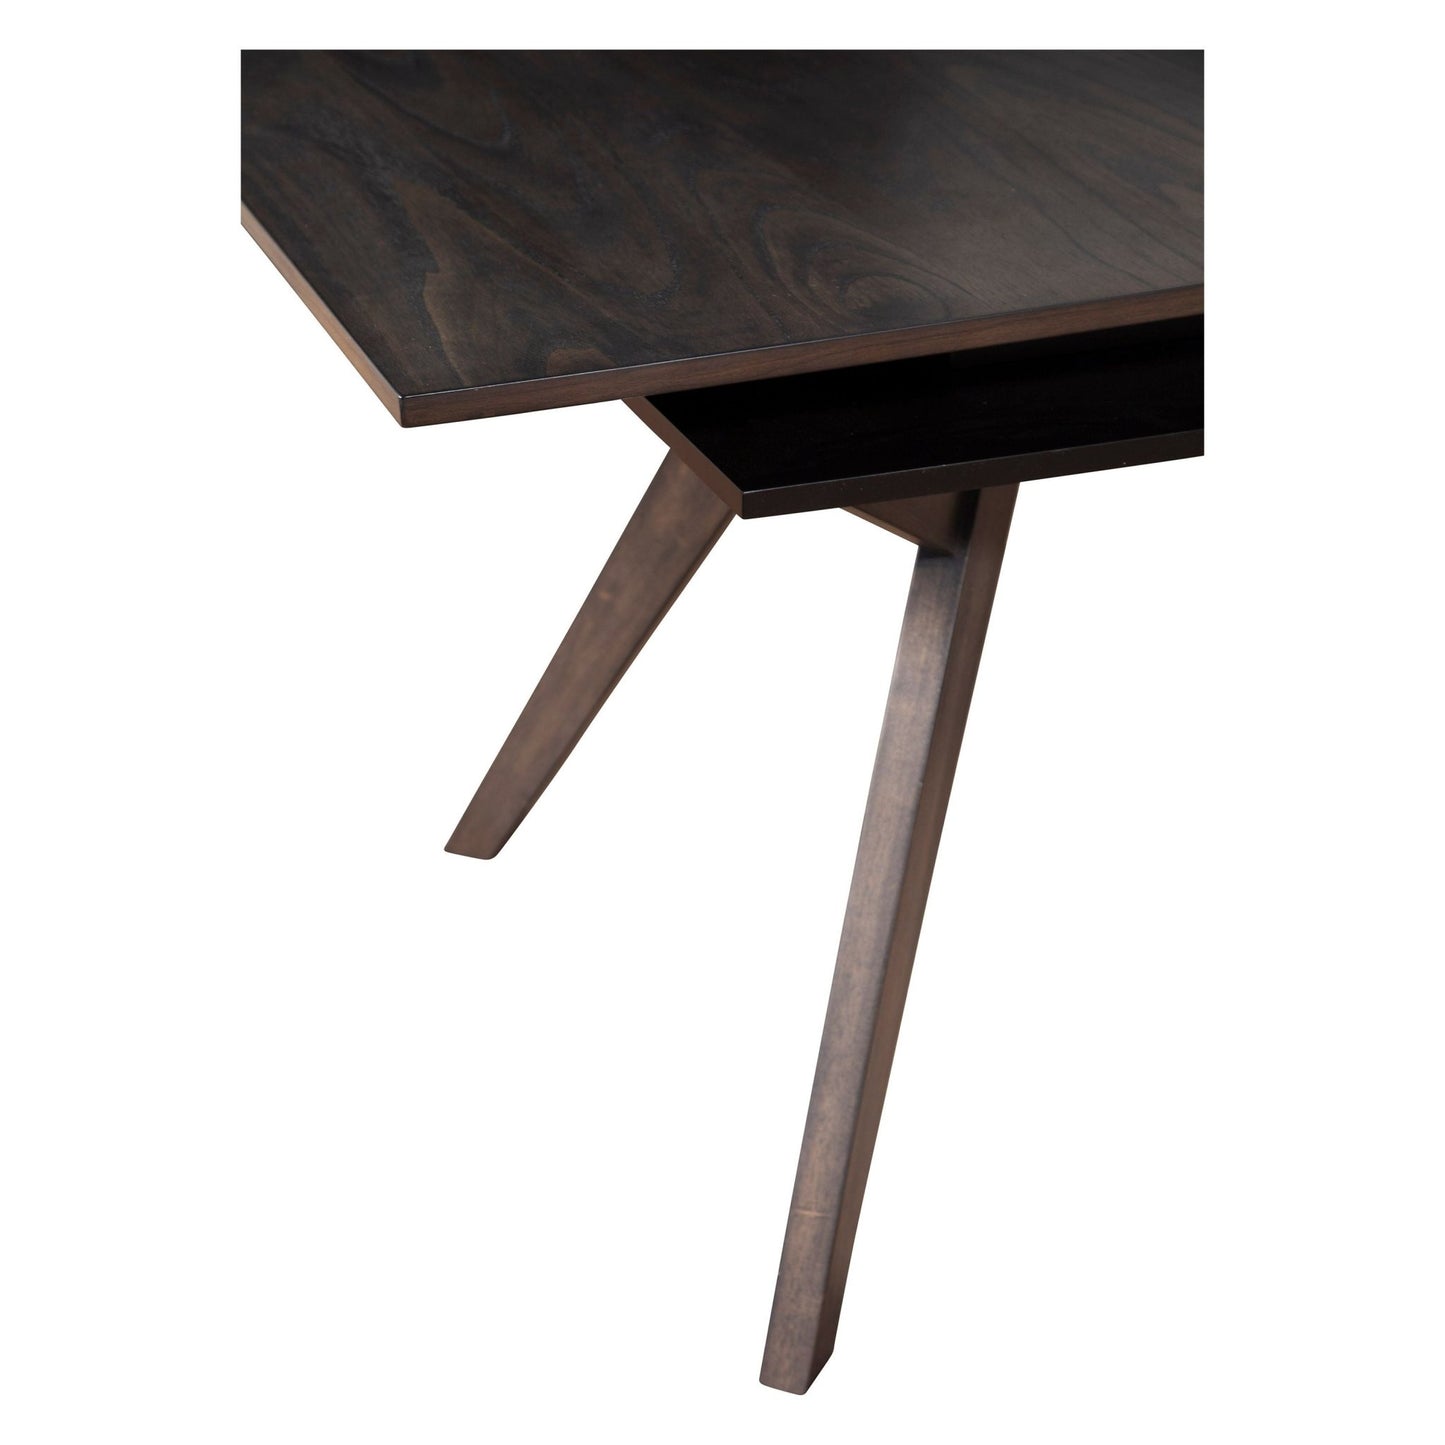 Lennox Extension Dining Table - Alpine Furniture